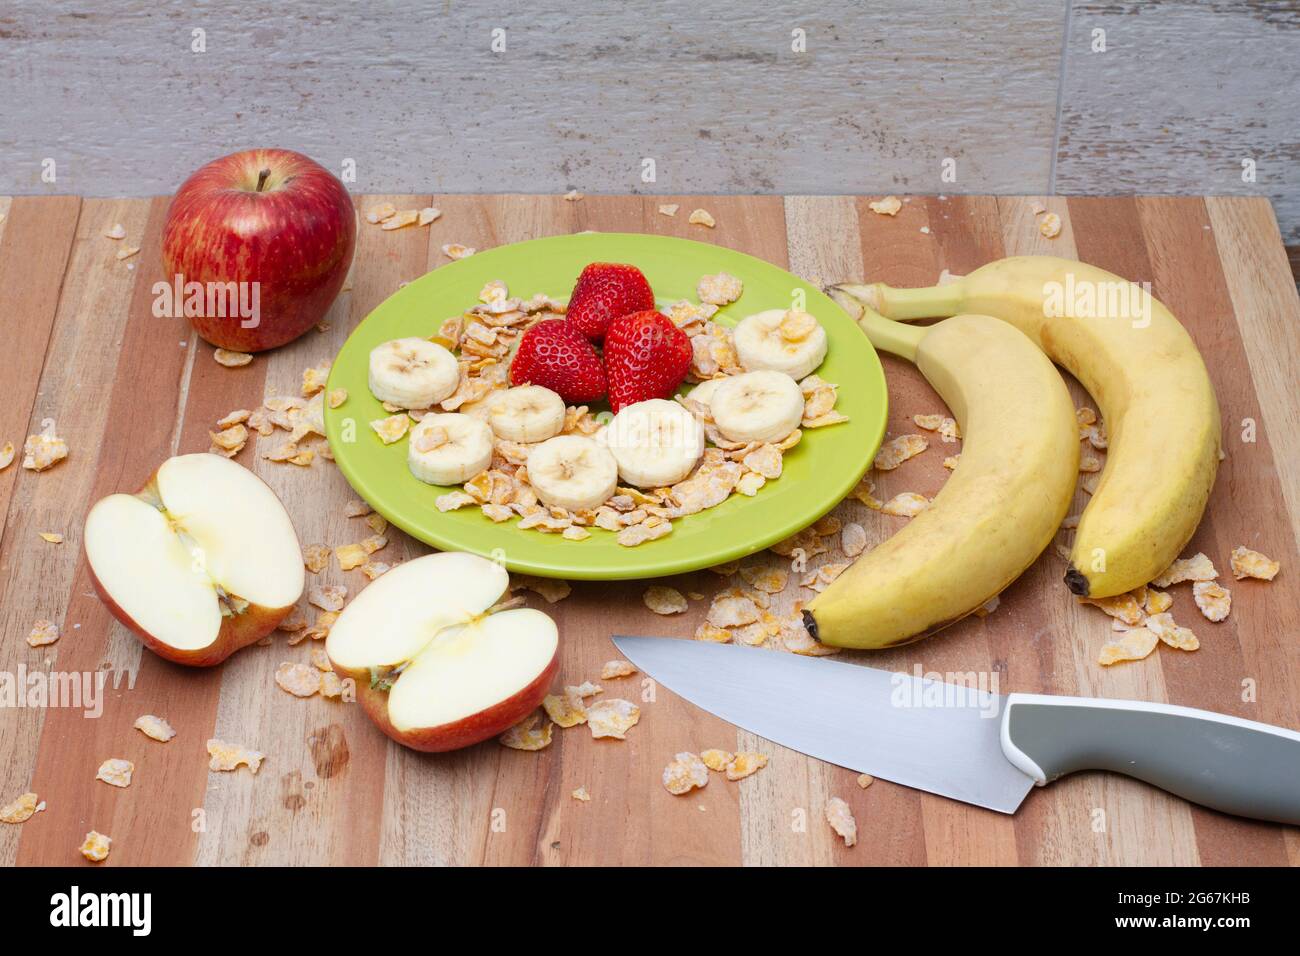 Red apple, sliced banana, strawberry berries and cereals Stock Photo